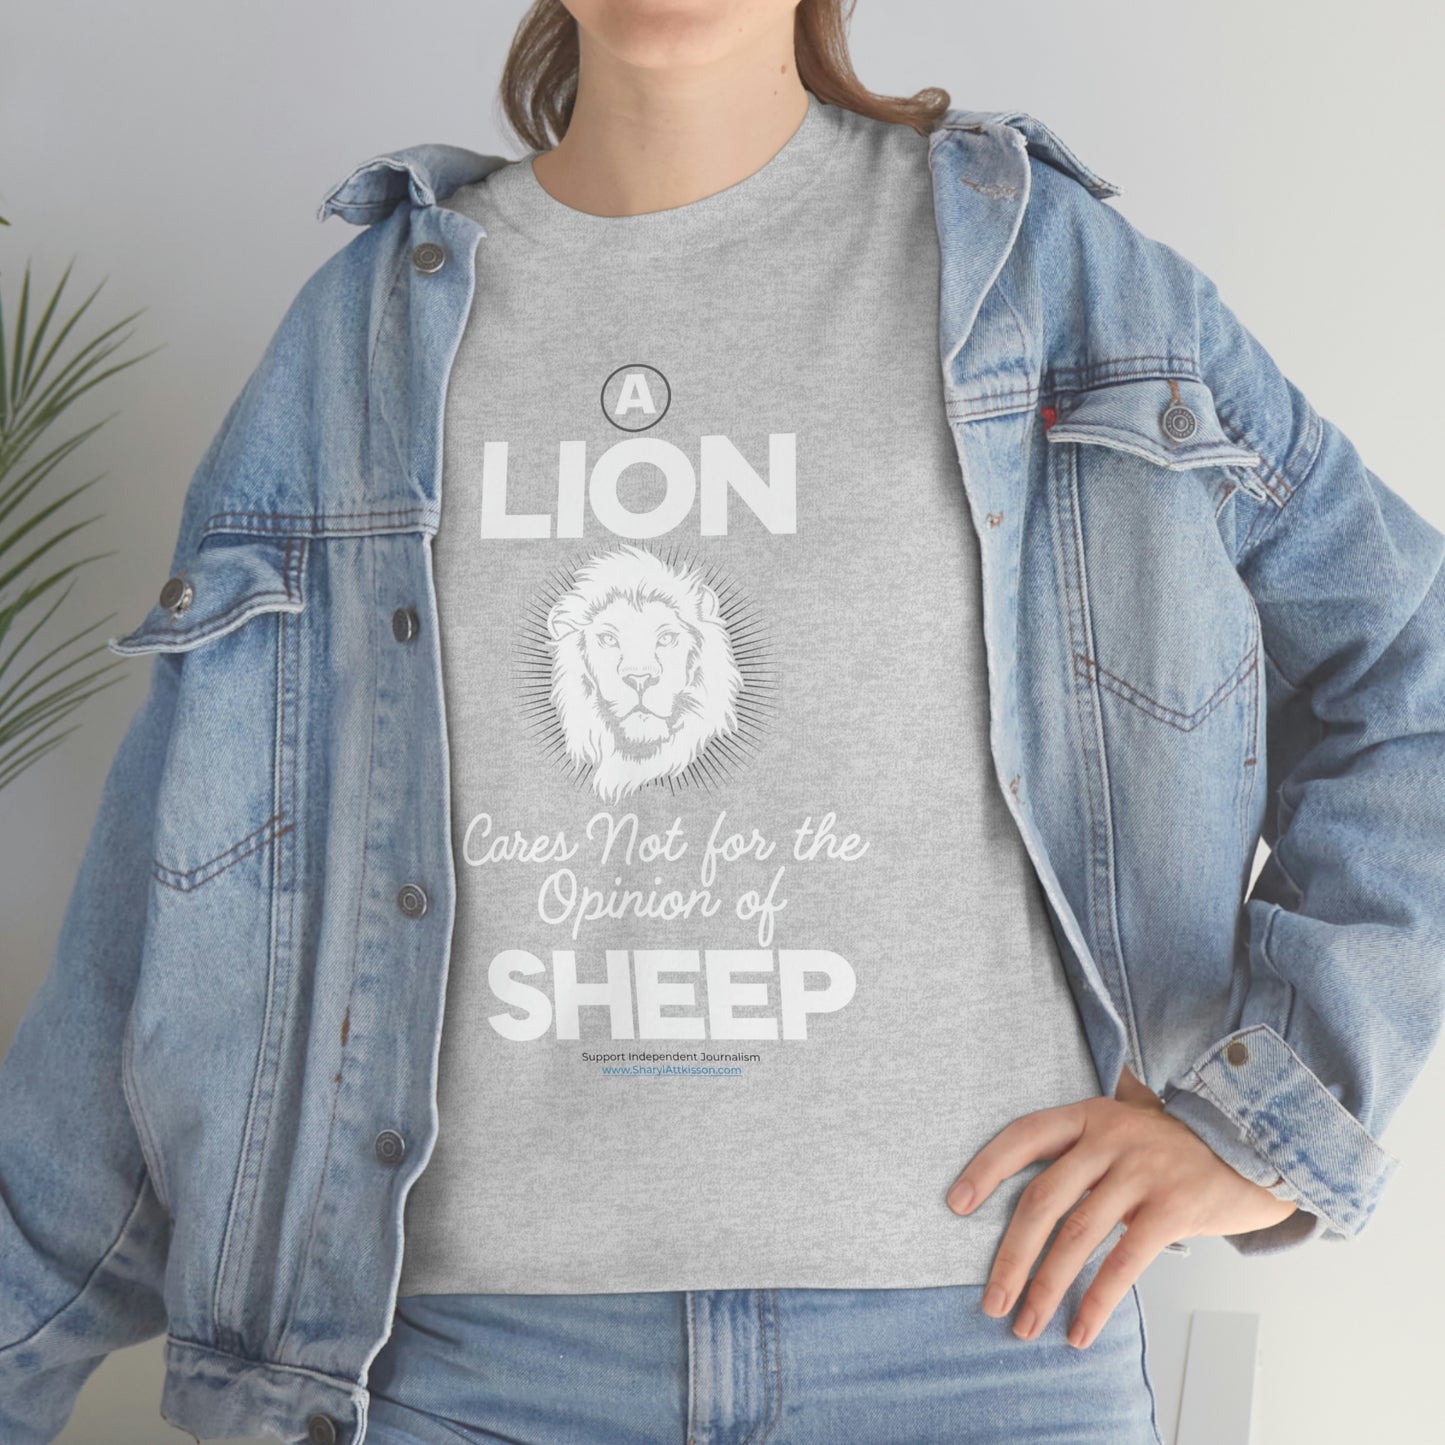 'A Lion Cares Not for...Sheep' T-Shirt (8 colors)